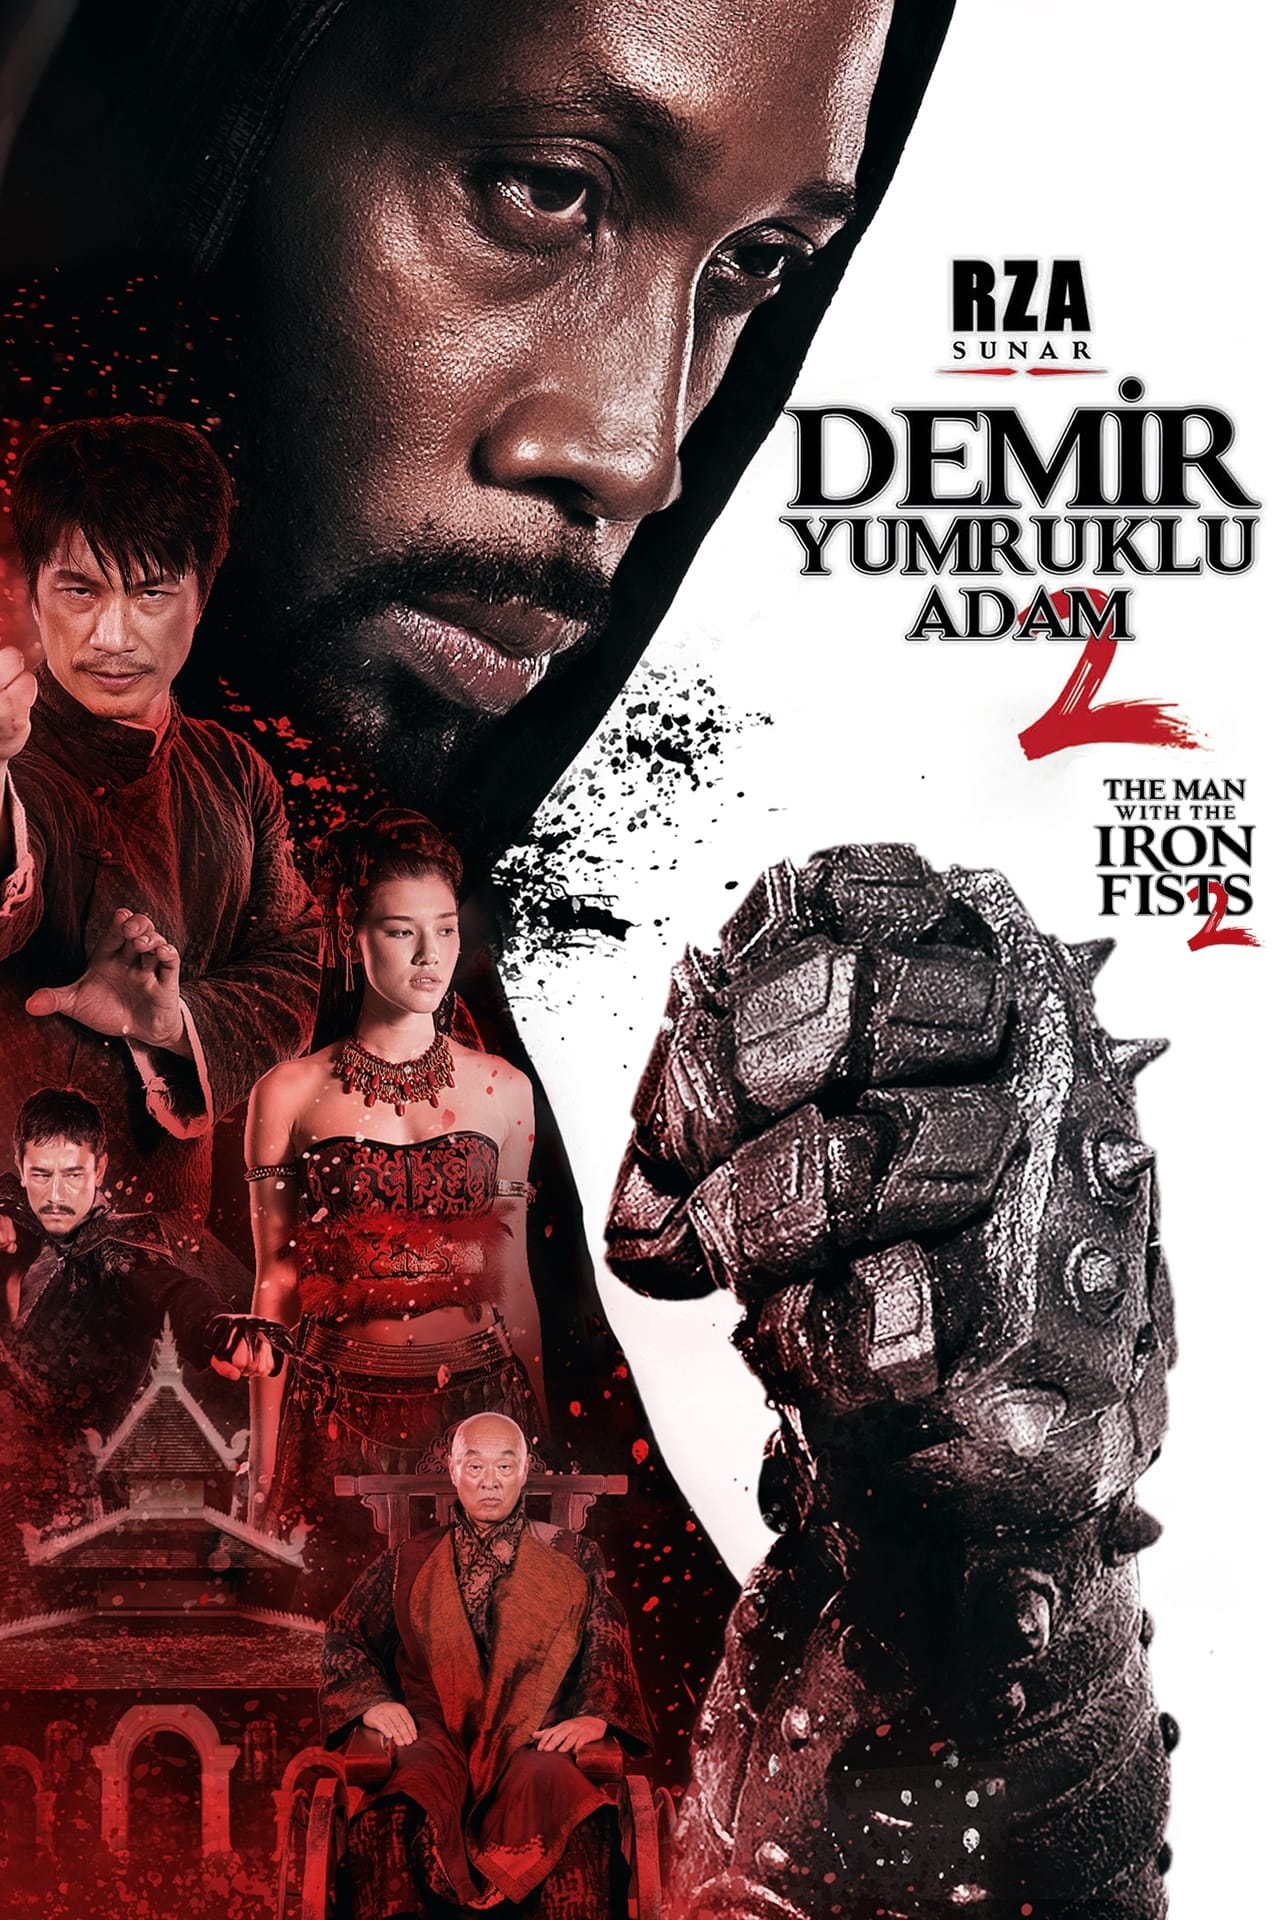 The Man with the Iron Fists 2 (2015) Theatrical Cut 640Kbps 23.976Fps 48Khz 5.1Ch DD+ NF E-AC3 Turkish Audio TAC